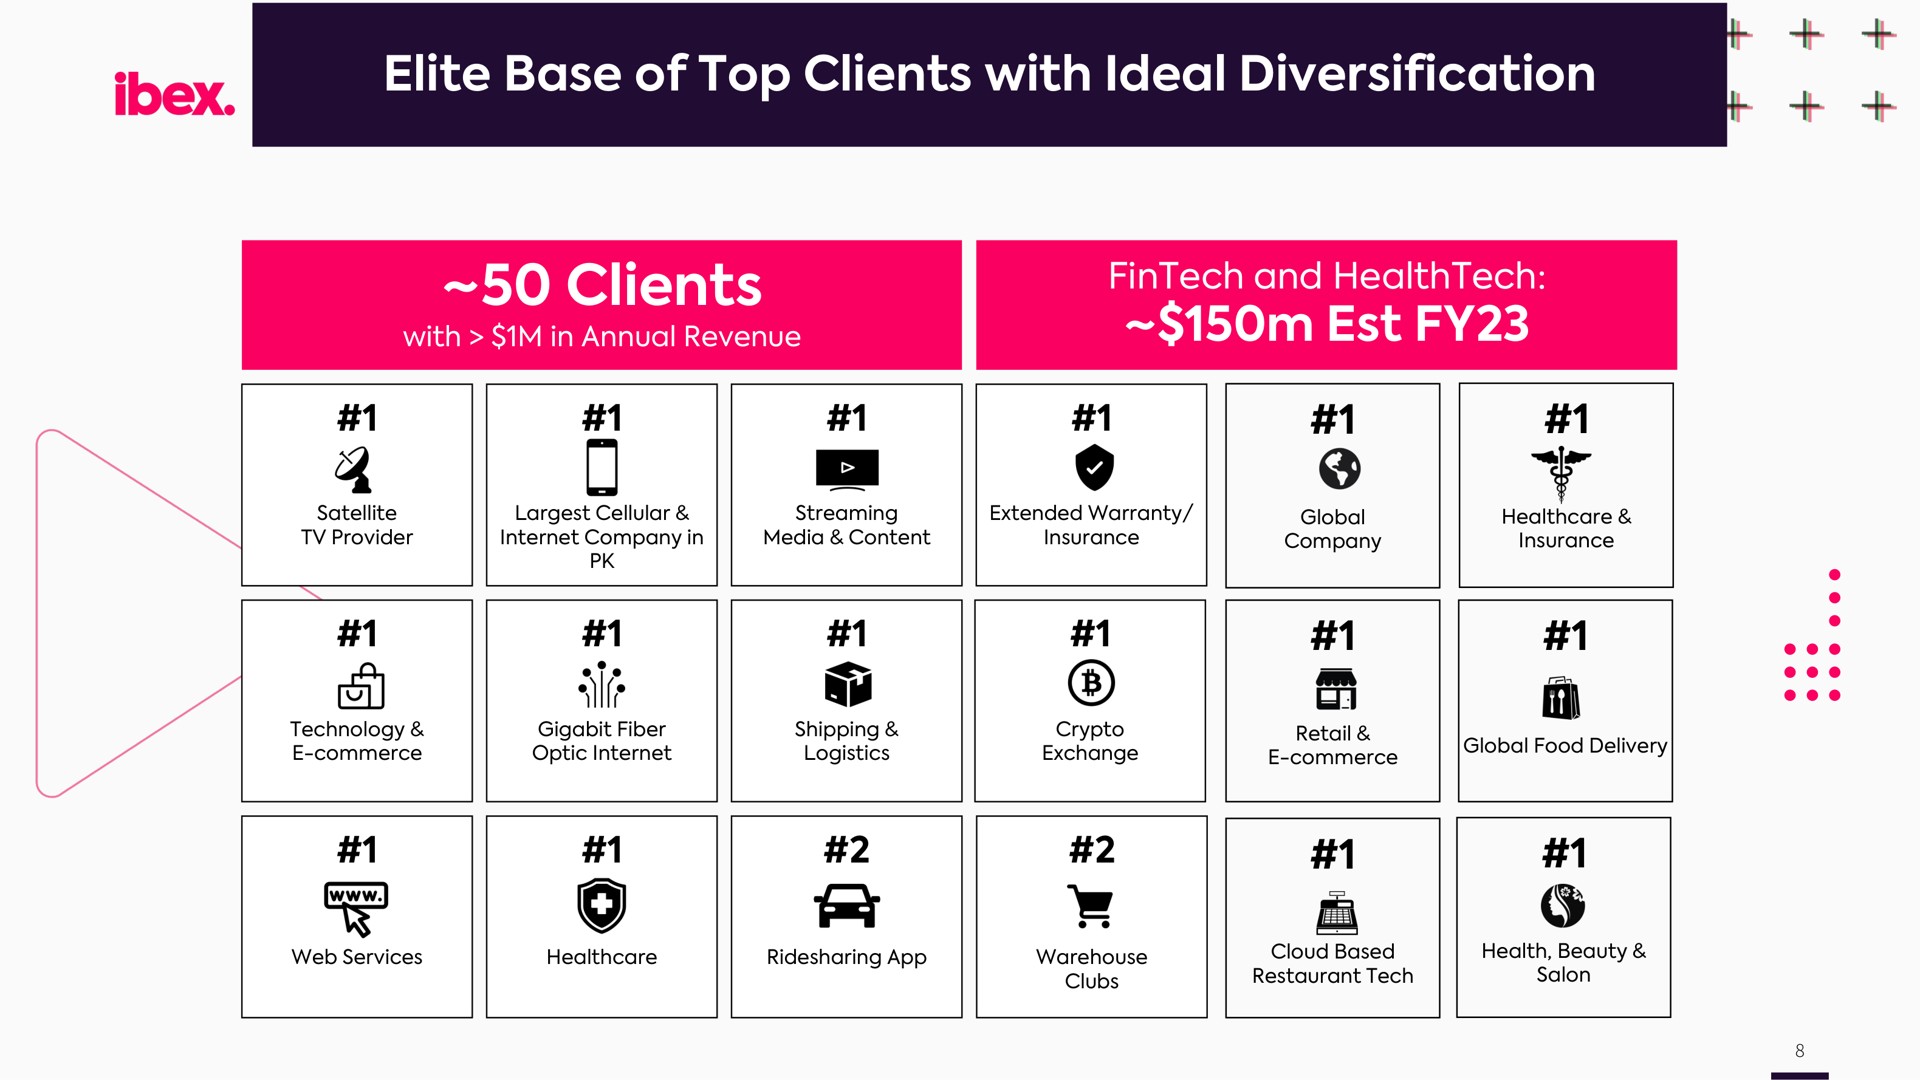 elite base of top clients with ideal diversification clients | IBEX